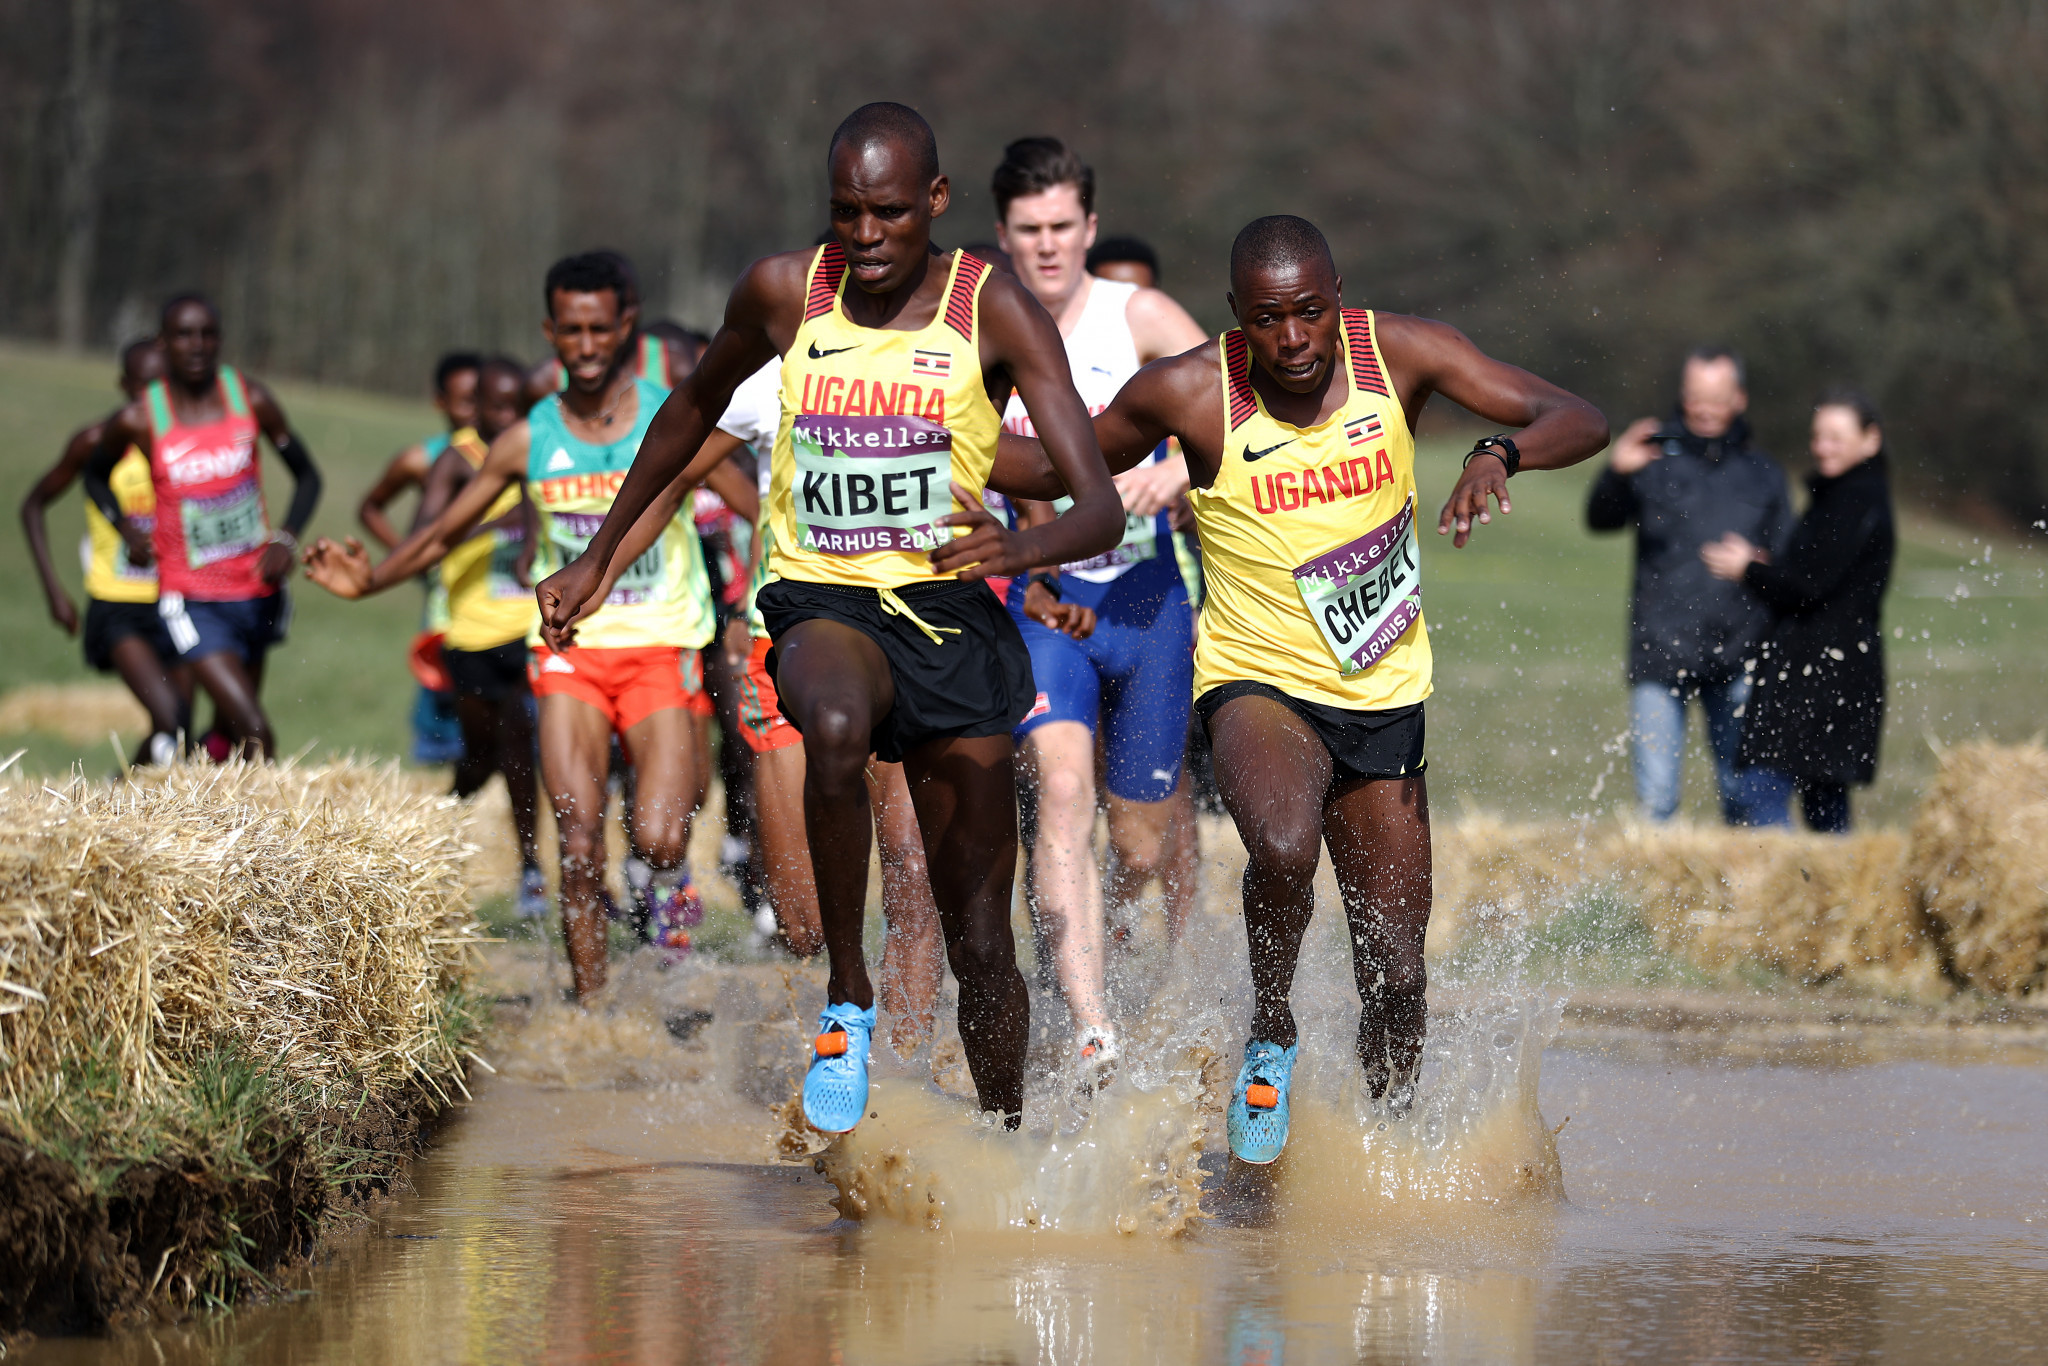 Bathhurst in Australia has sought a postponement of its hosting of next year's World Athletics Cross Country Championships ©Getty Images